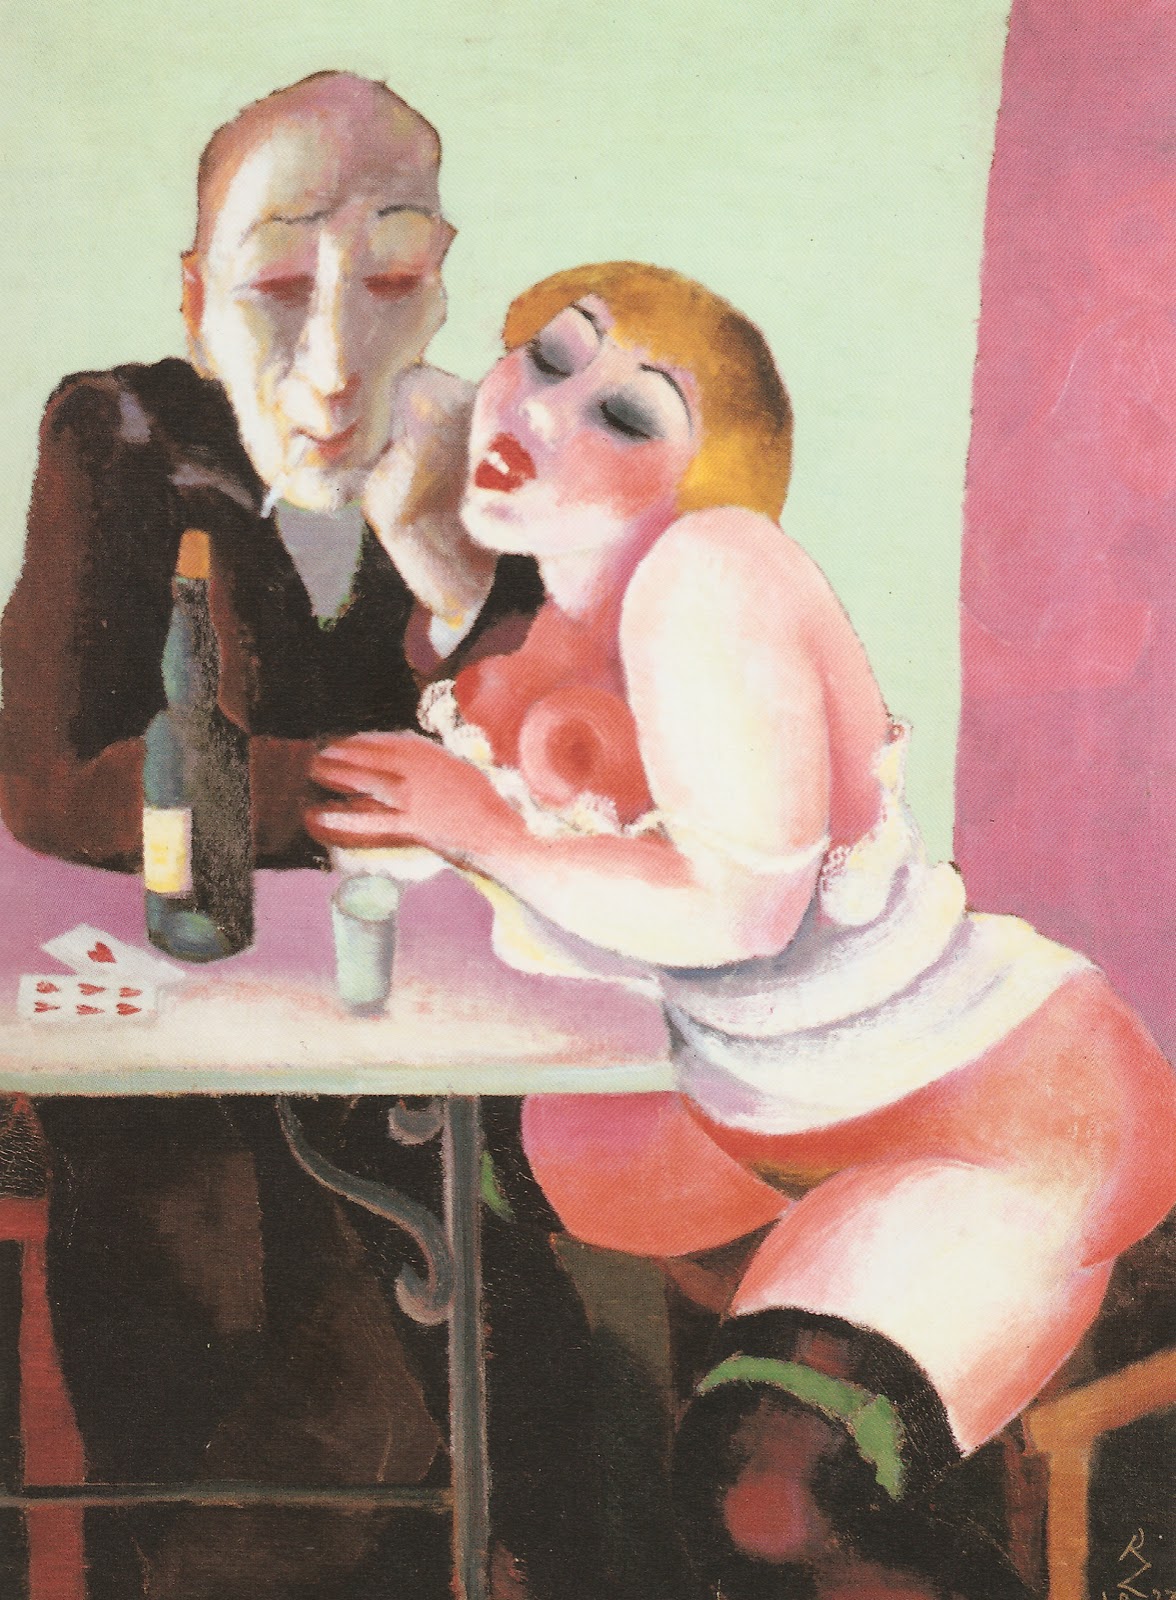 Paar am Tisch (Couple At Table) by Richard Ziegler